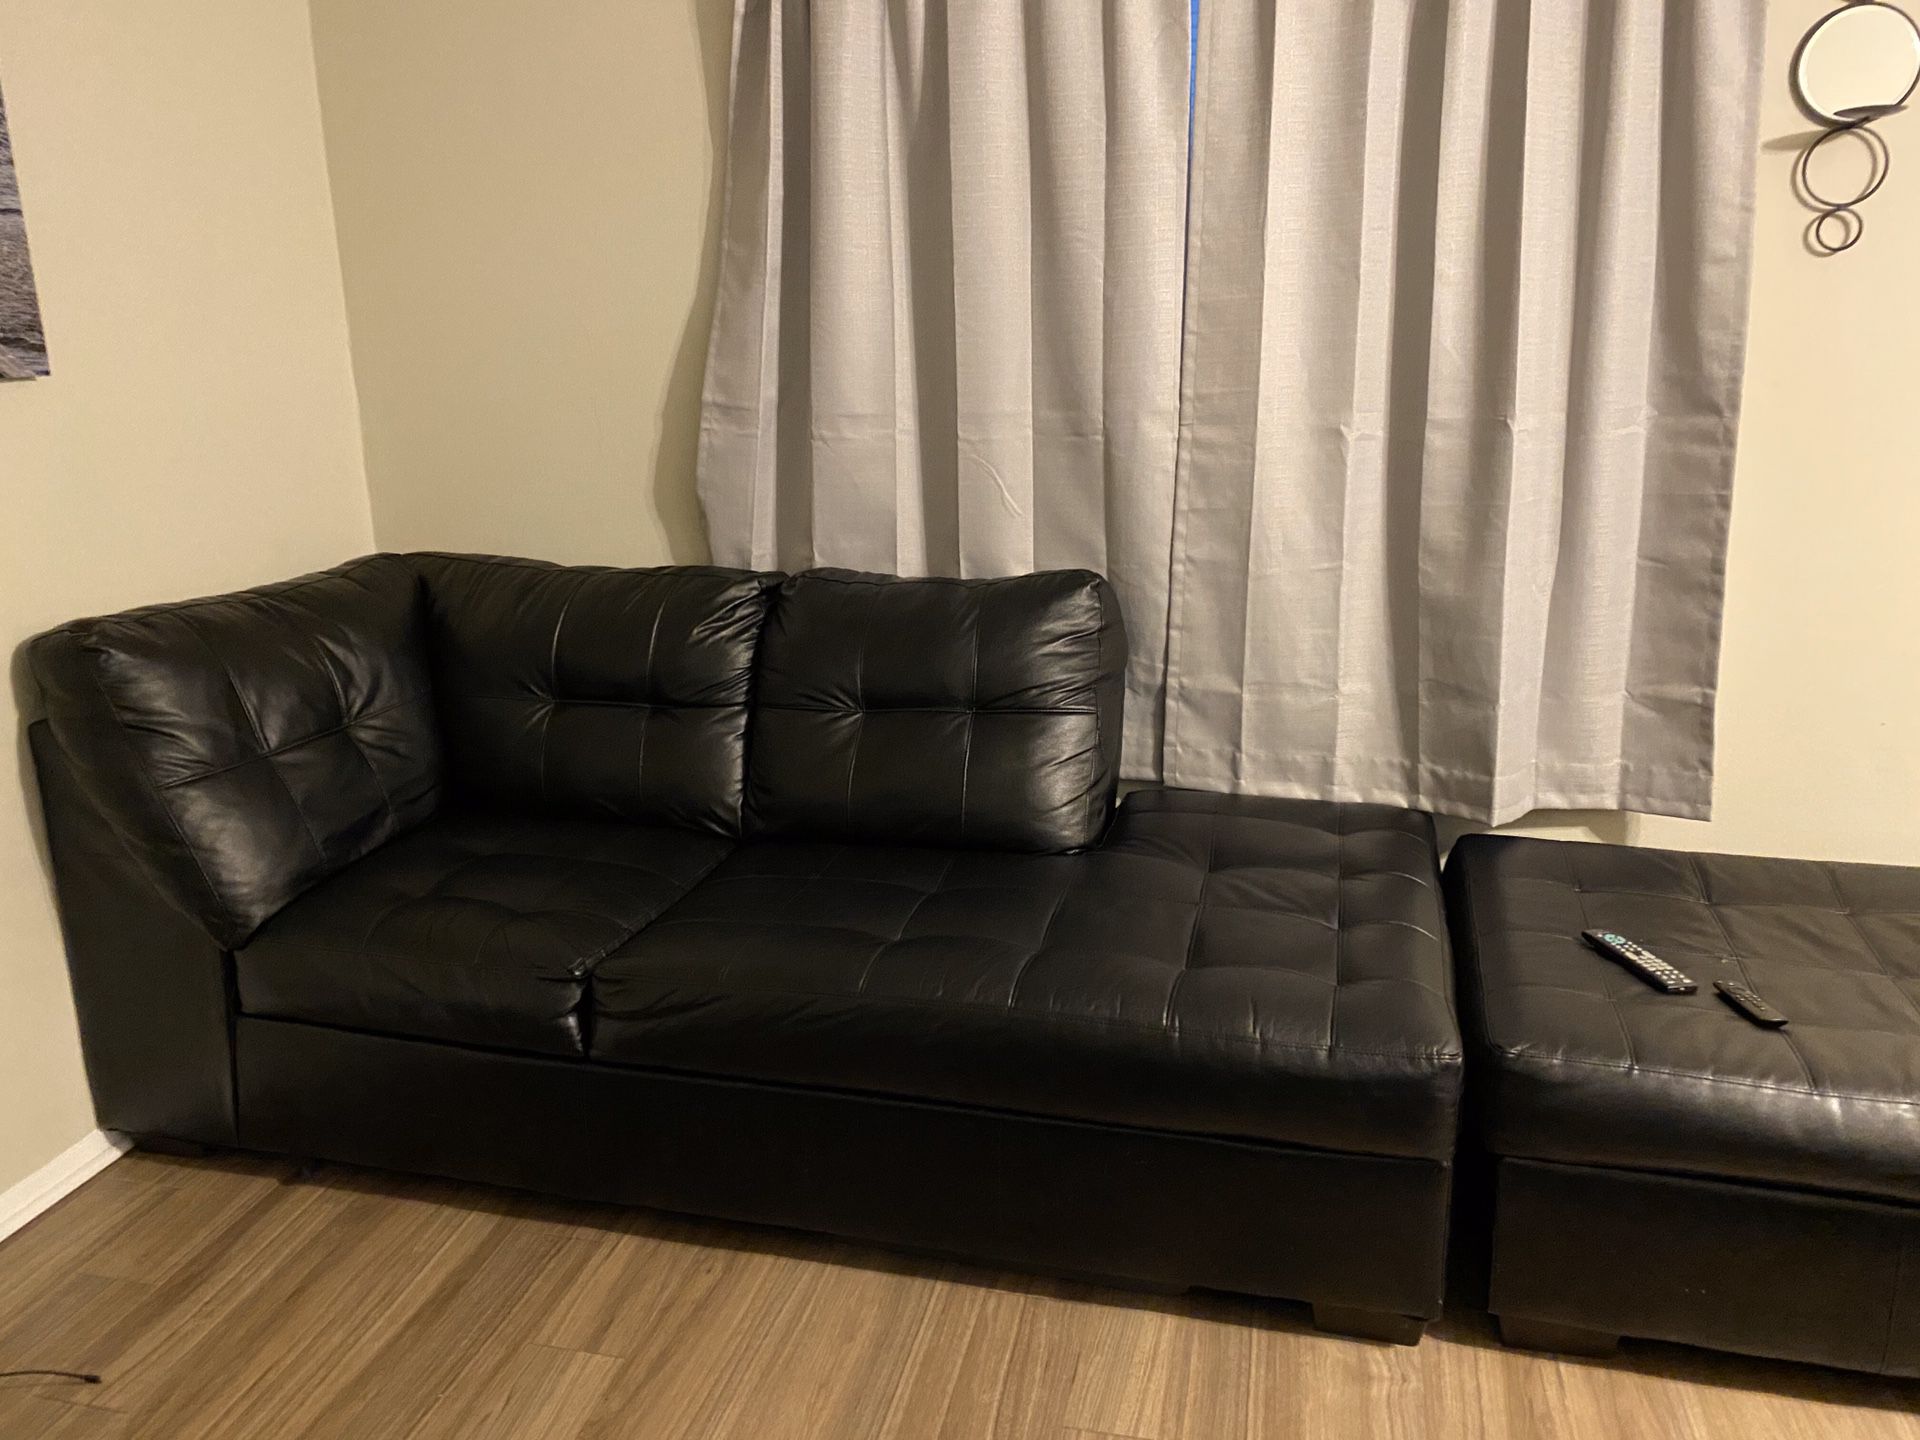 Three-piece sectional